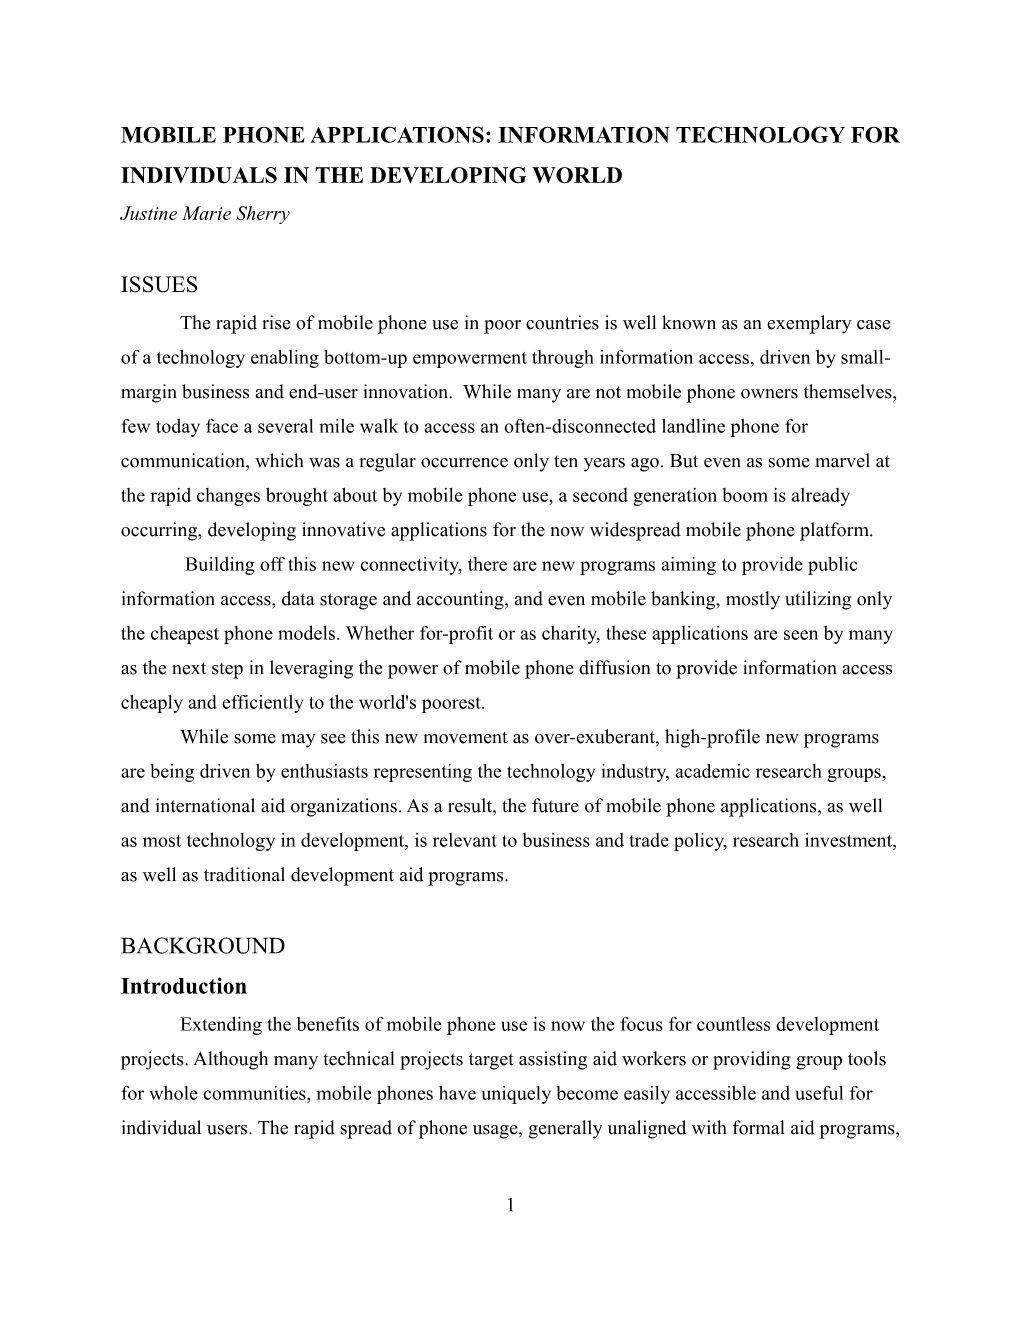 MOBILE PHONE APPLICATIONS: INFORMATION TECHNOLOGY for INDIVIDUALS in the DEVELOPING WORLD Justine Marie Sherry